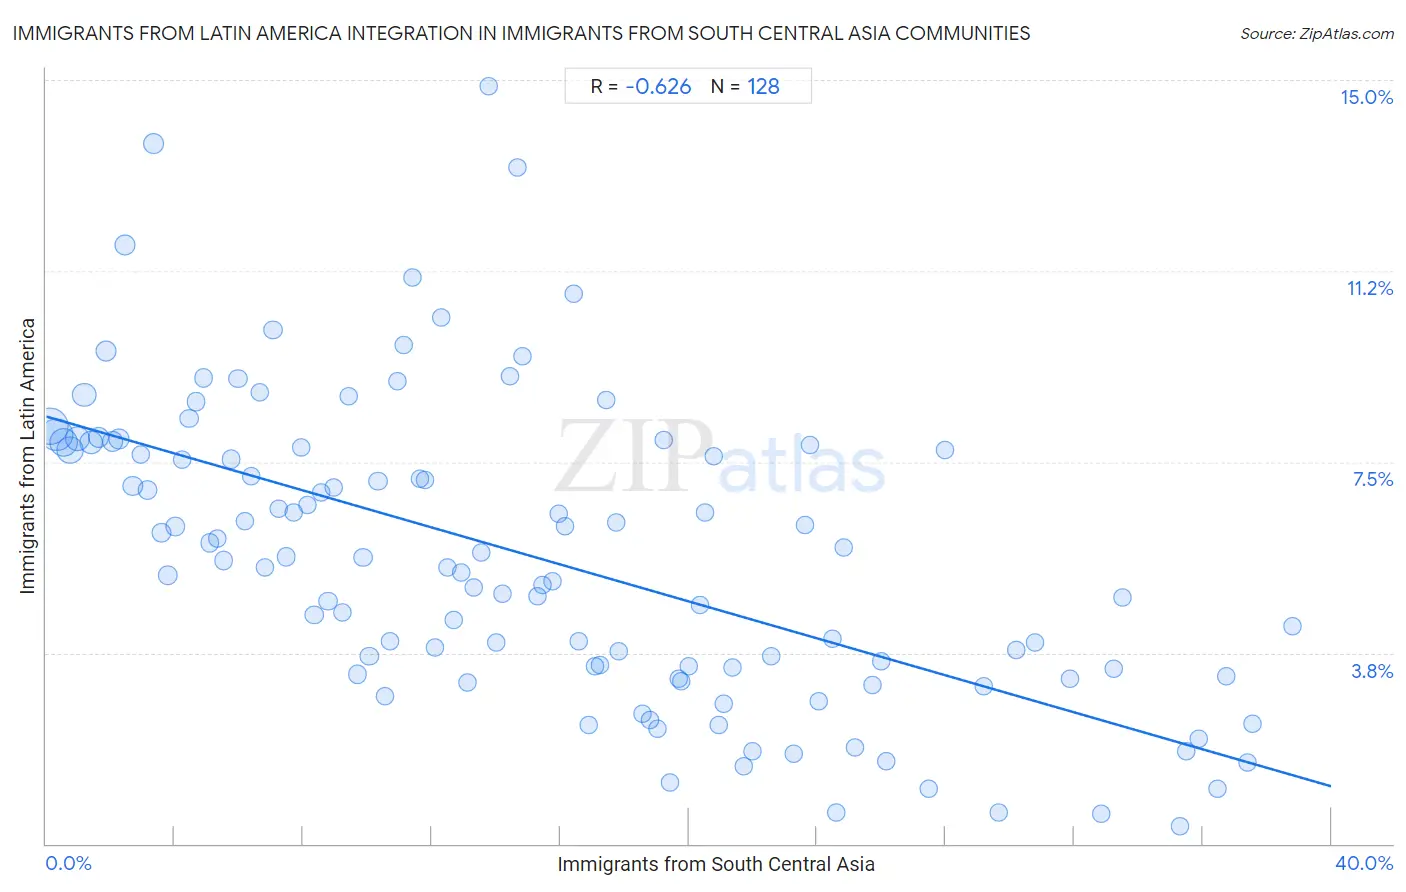 Immigrants from South Central Asia Integration in Immigrants from Latin America Communities